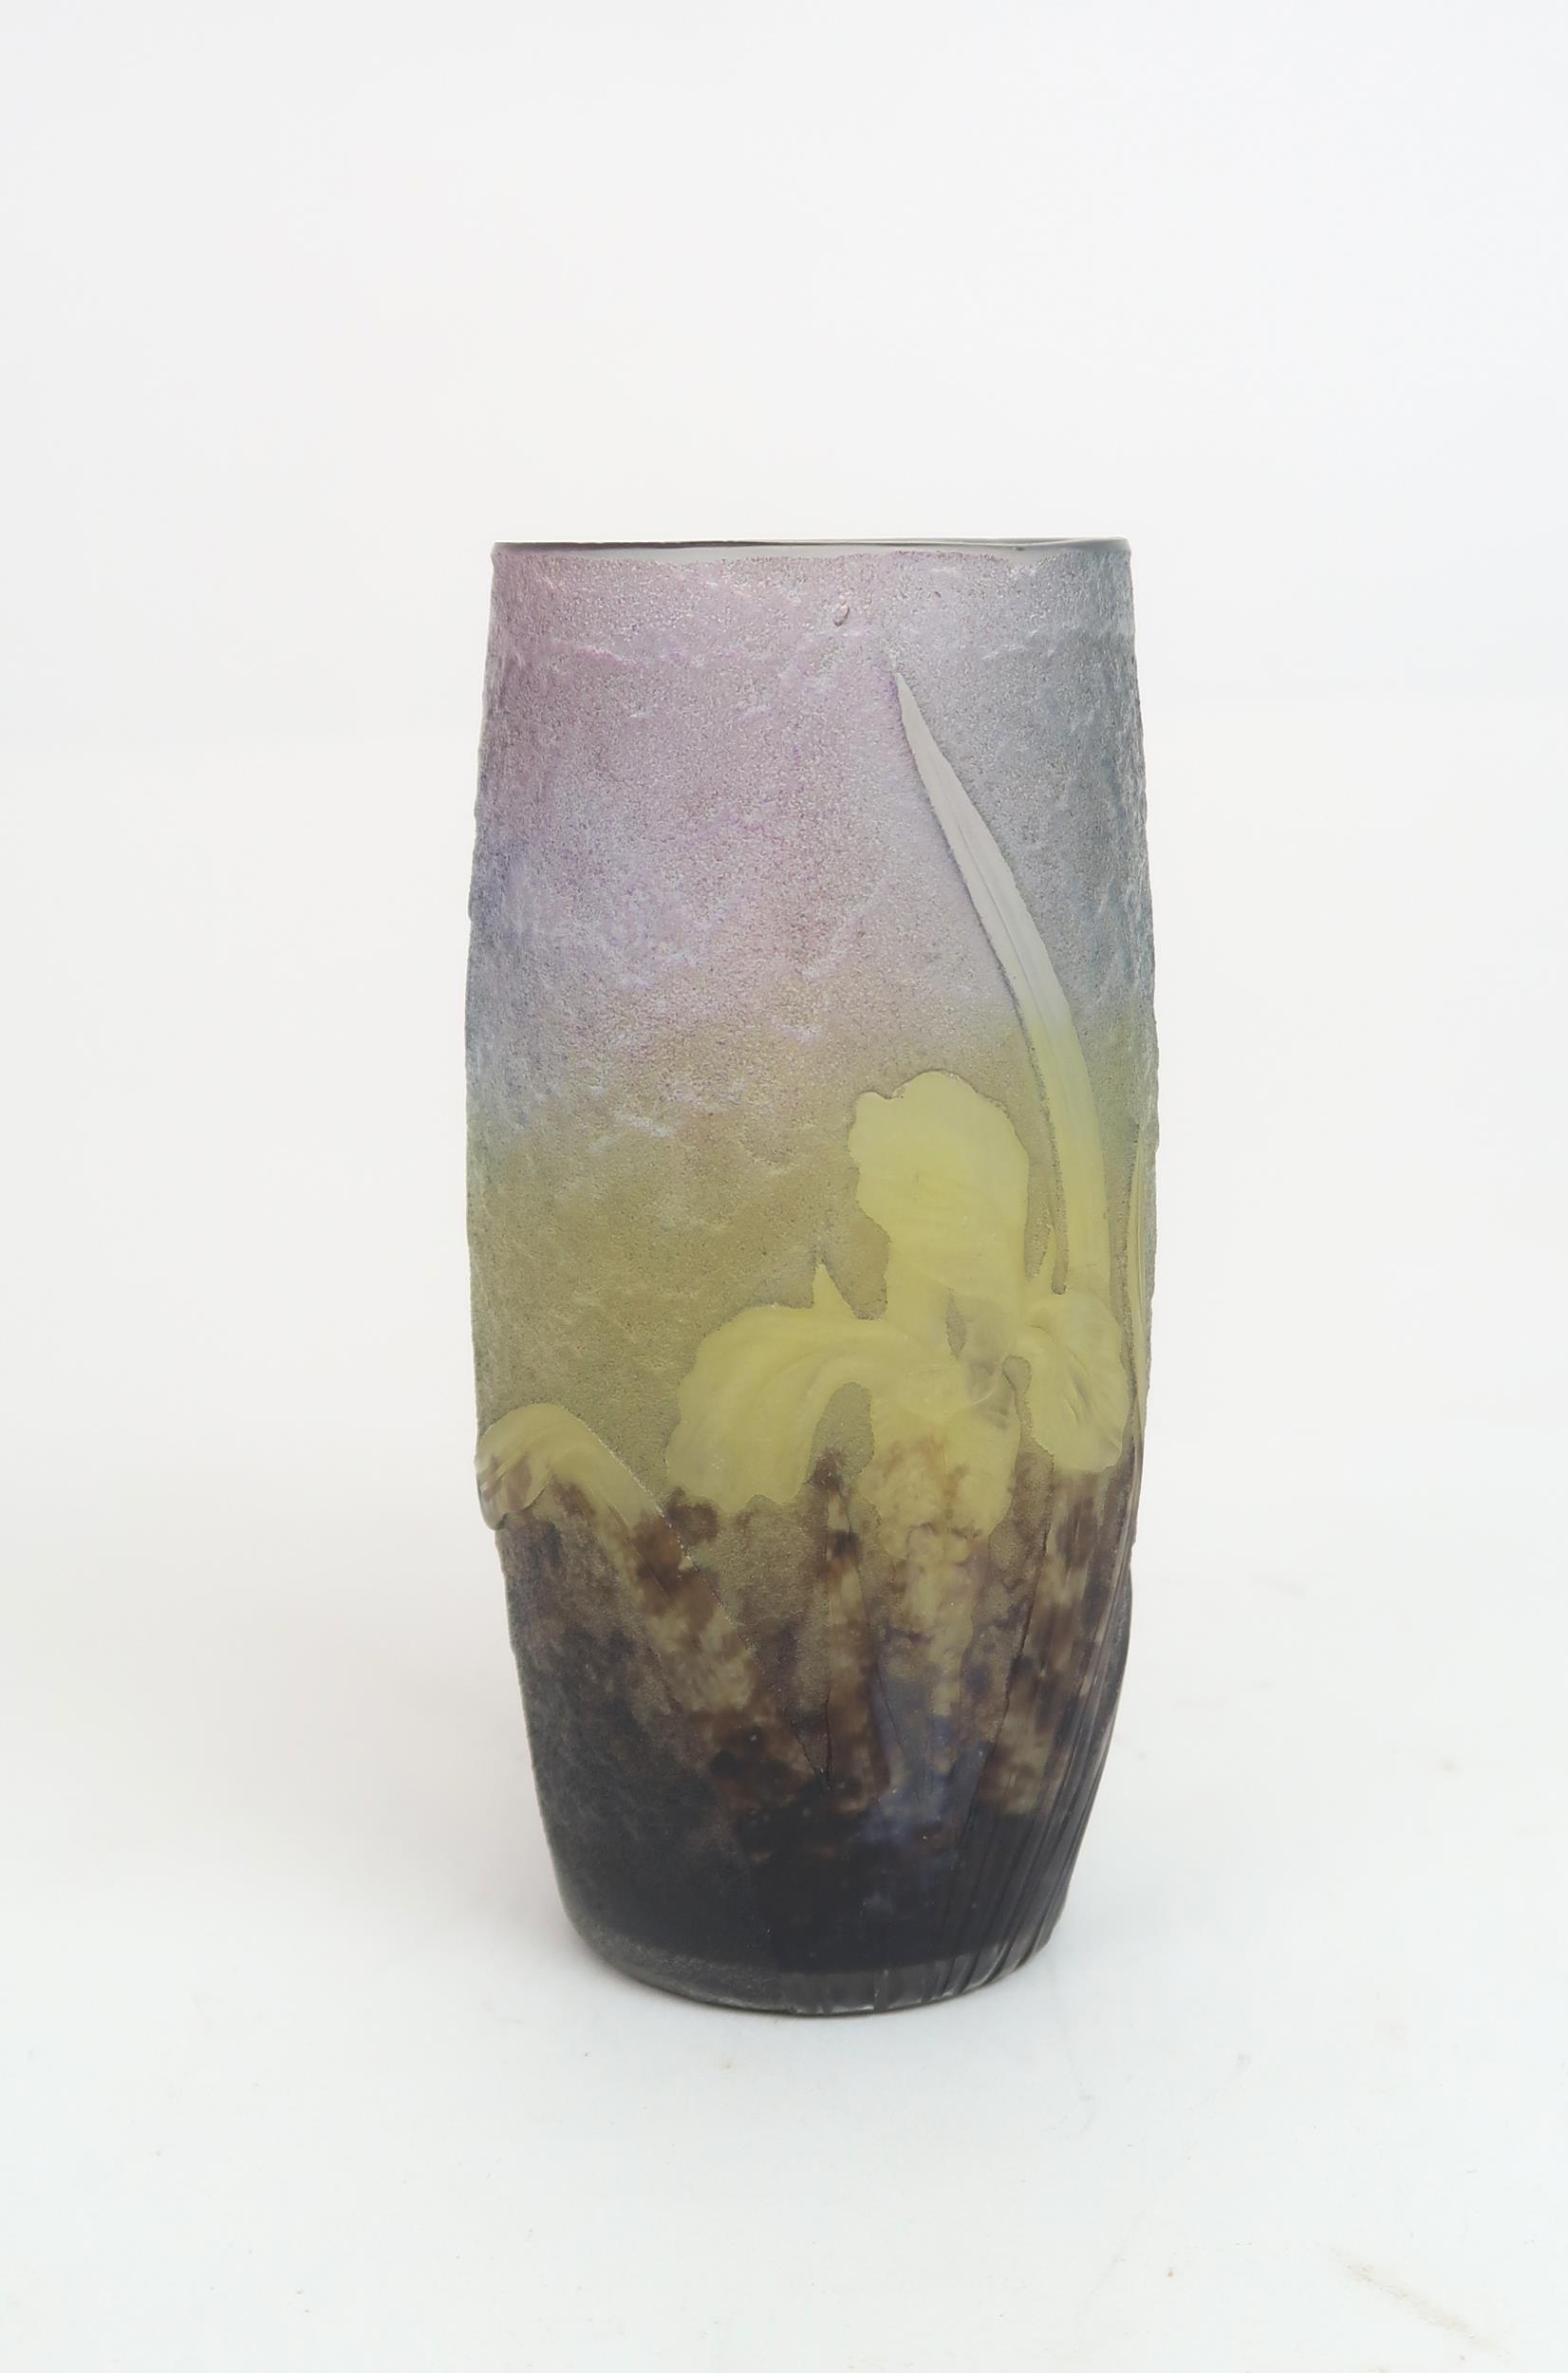 A DAUM NANCY CAMEO GLASS VASE the textured mottled body in shades of yellow, blue and violet,